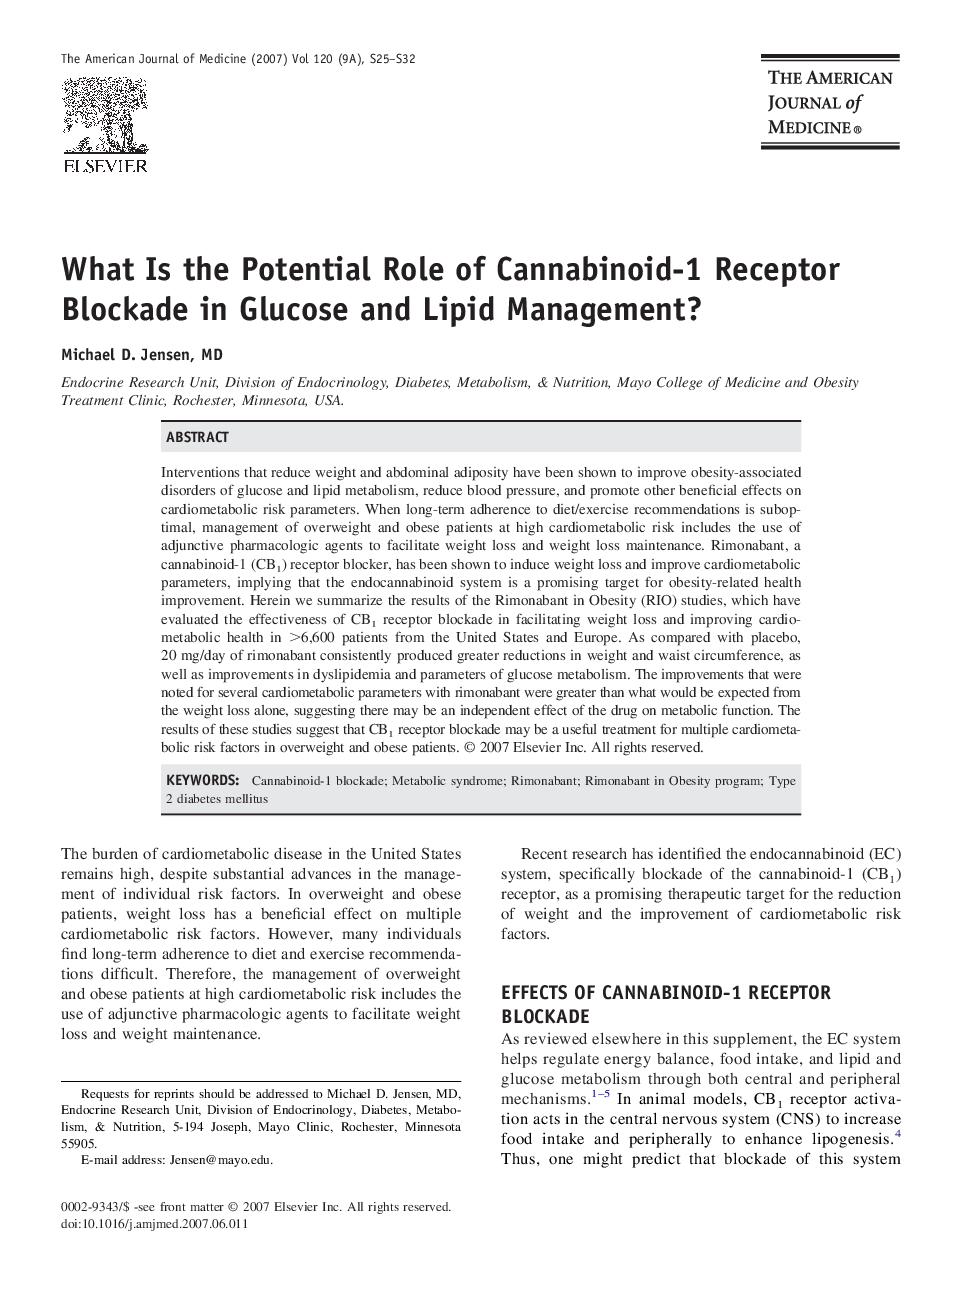 What Is the Potential Role of Cannabinoid-1 Receptor Blockade in Glucose and Lipid Management?